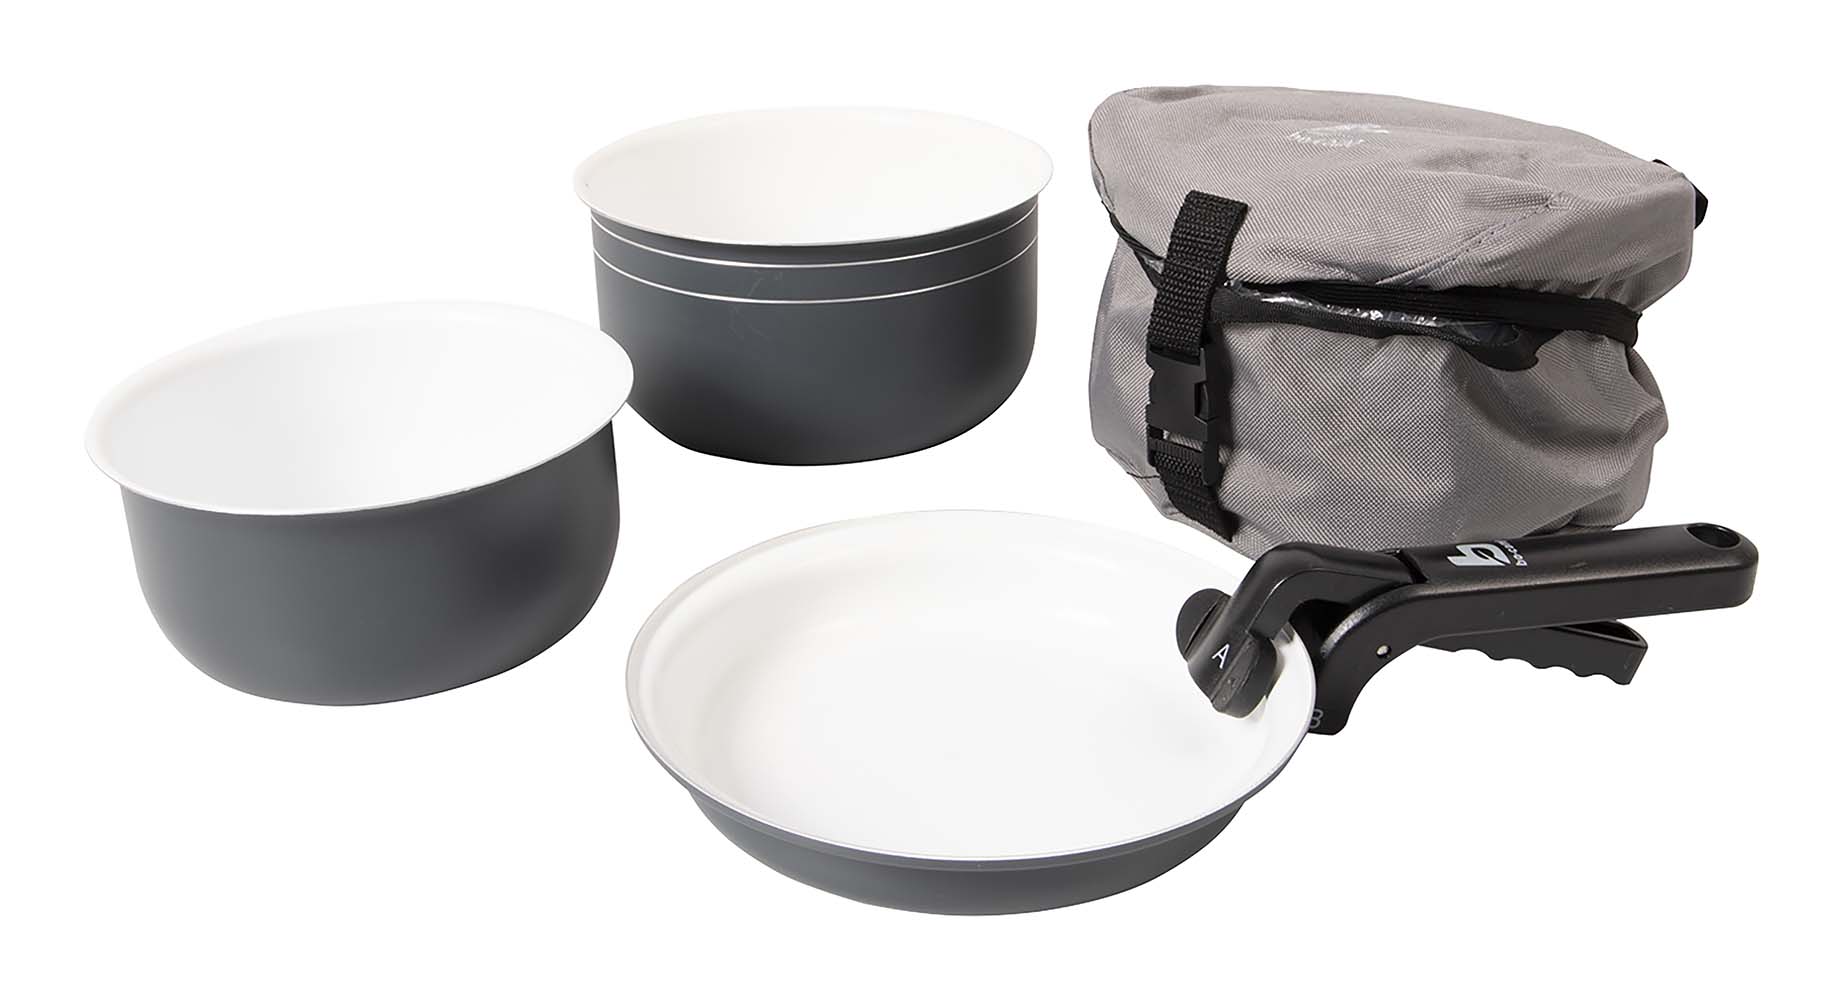 2300394 A stylish and very compact 5-piece cookware set. This complete lightweight set consists of 2 saucepans, 1 frying pan, a straining lid and a pan handle. These pans have a powder coating on the outside and a ceramic coating on the inside. The ceramic is very durable and has a high quality non-stick coating. Suitable for the following heat sources; gas, ceramic and electric. All parts can be compactly stored in the supplied luxury protective cover.